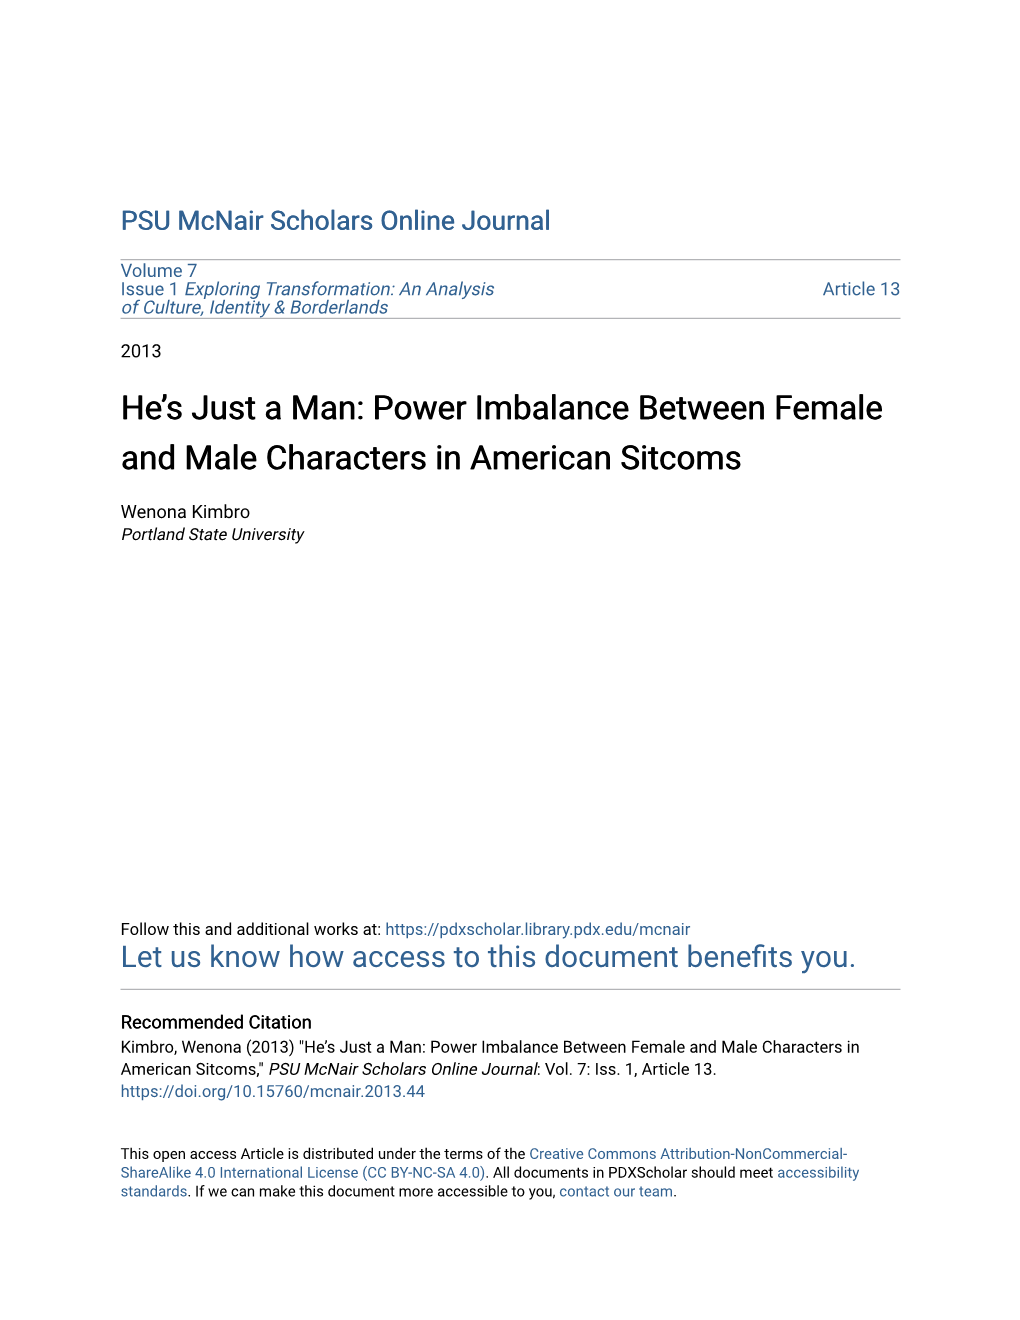 Power Imbalance Between Female and Male Characters in American Sitcoms